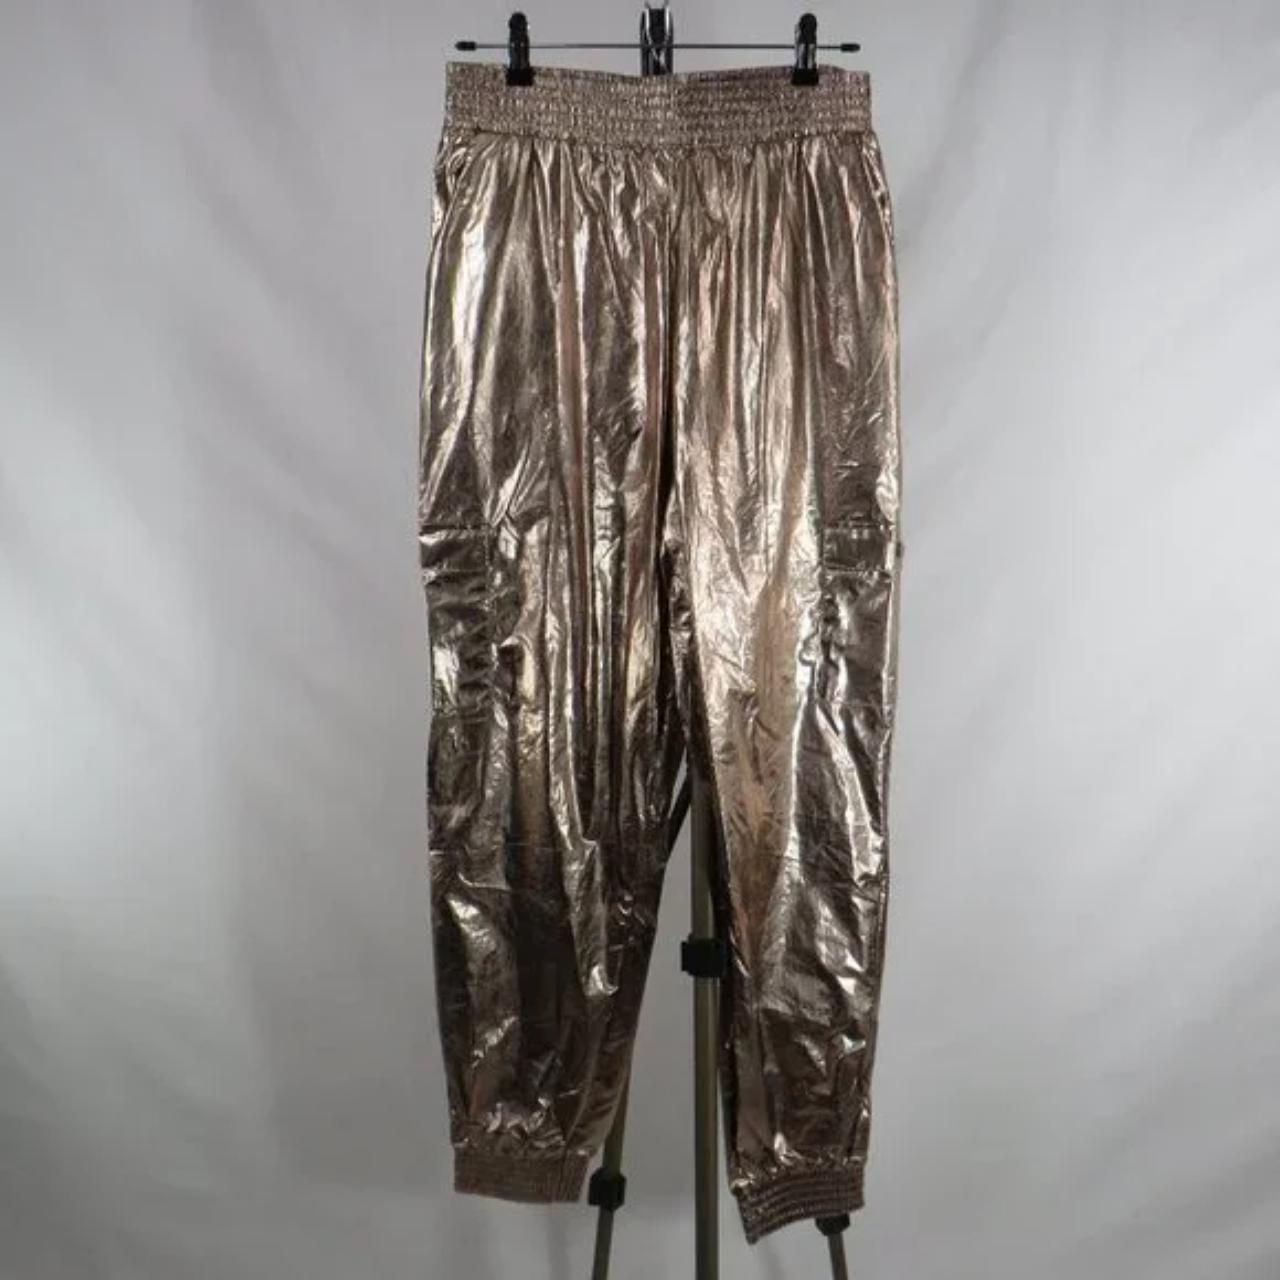 Gold Victoria Sport windbreaker high-rise pants with... - Depop